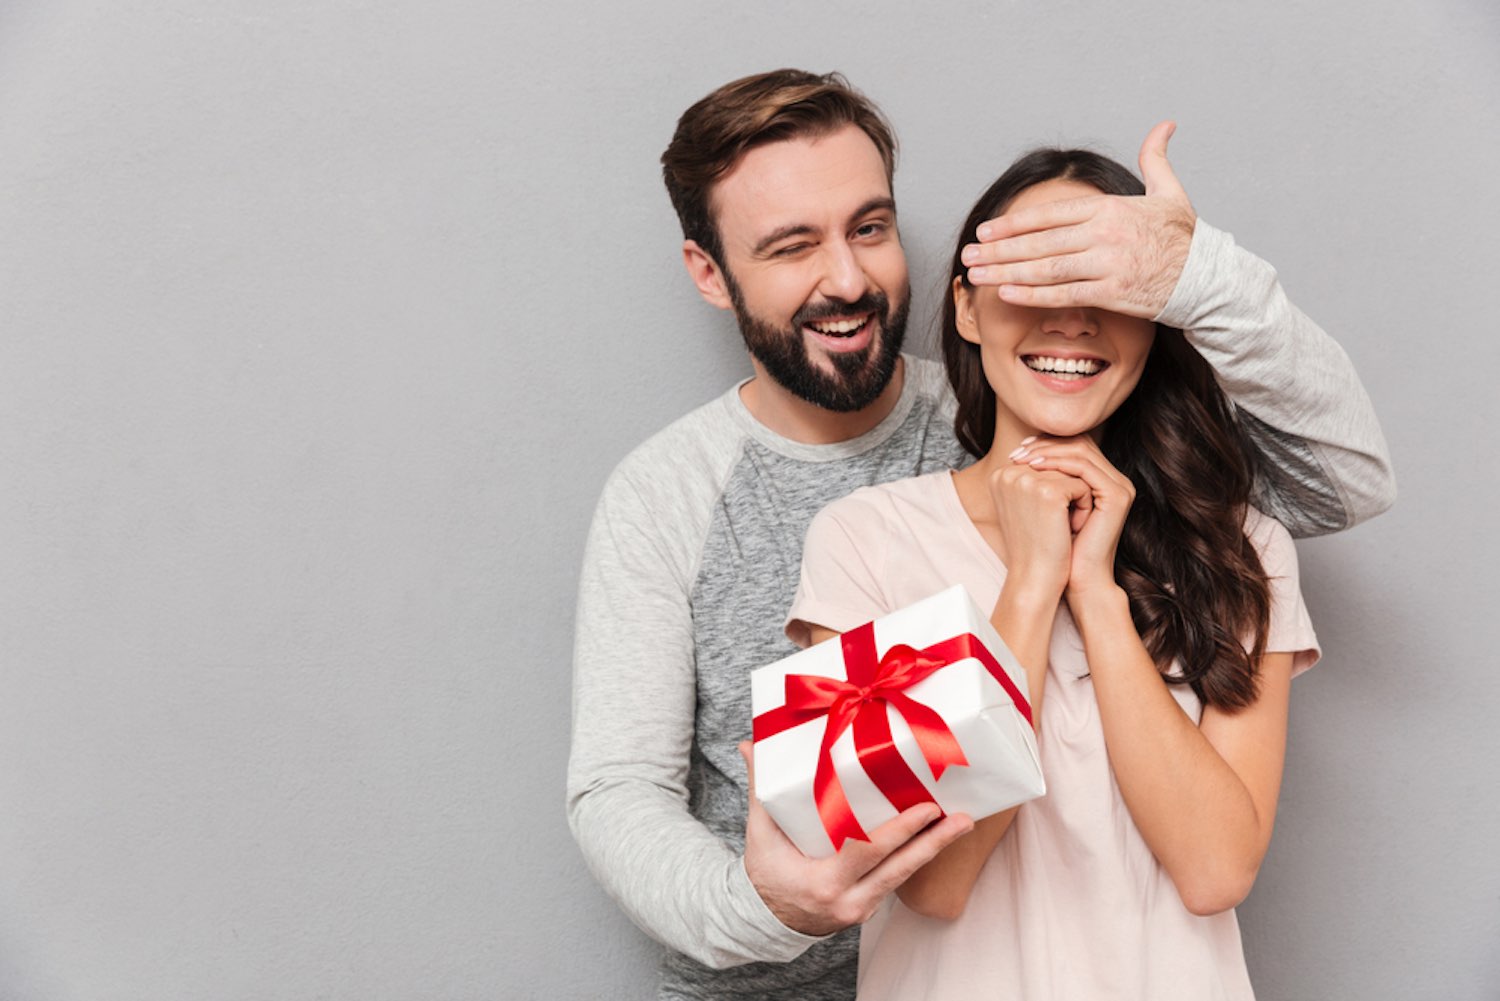 Want To Give Gift To Your Partner? Here Is A Guide